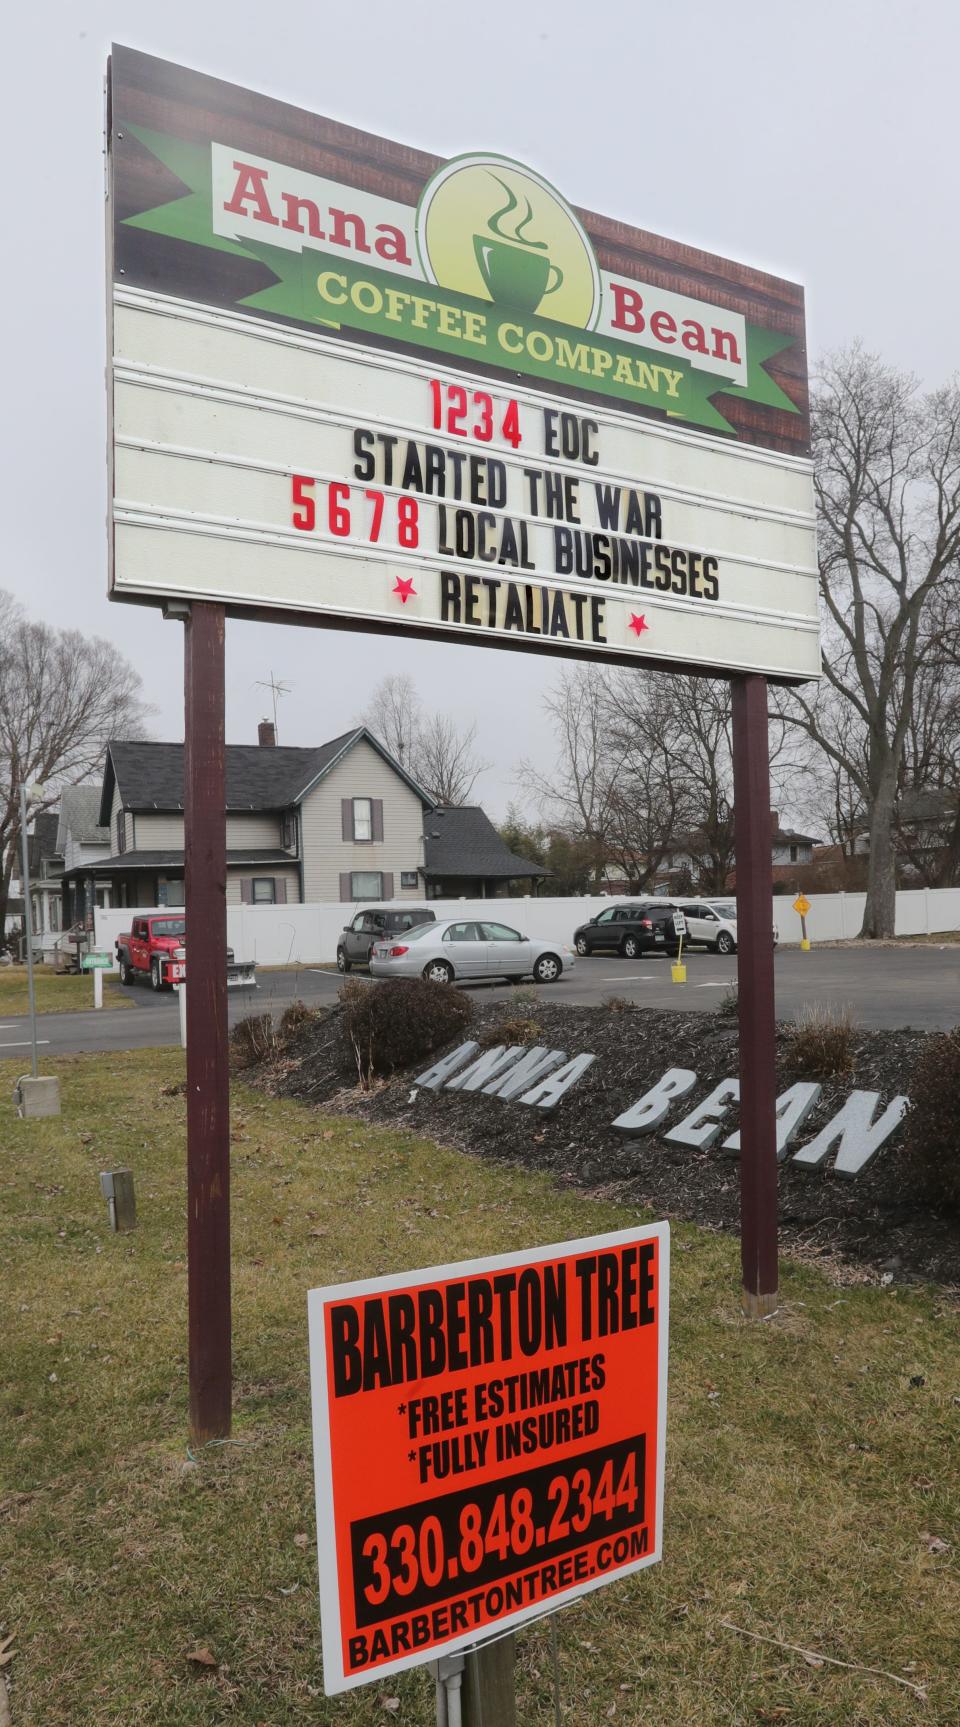 The Anna Bean Coffee Company displays a cheeky message Monday taking credit for stirring up the sign wars in Barberton.